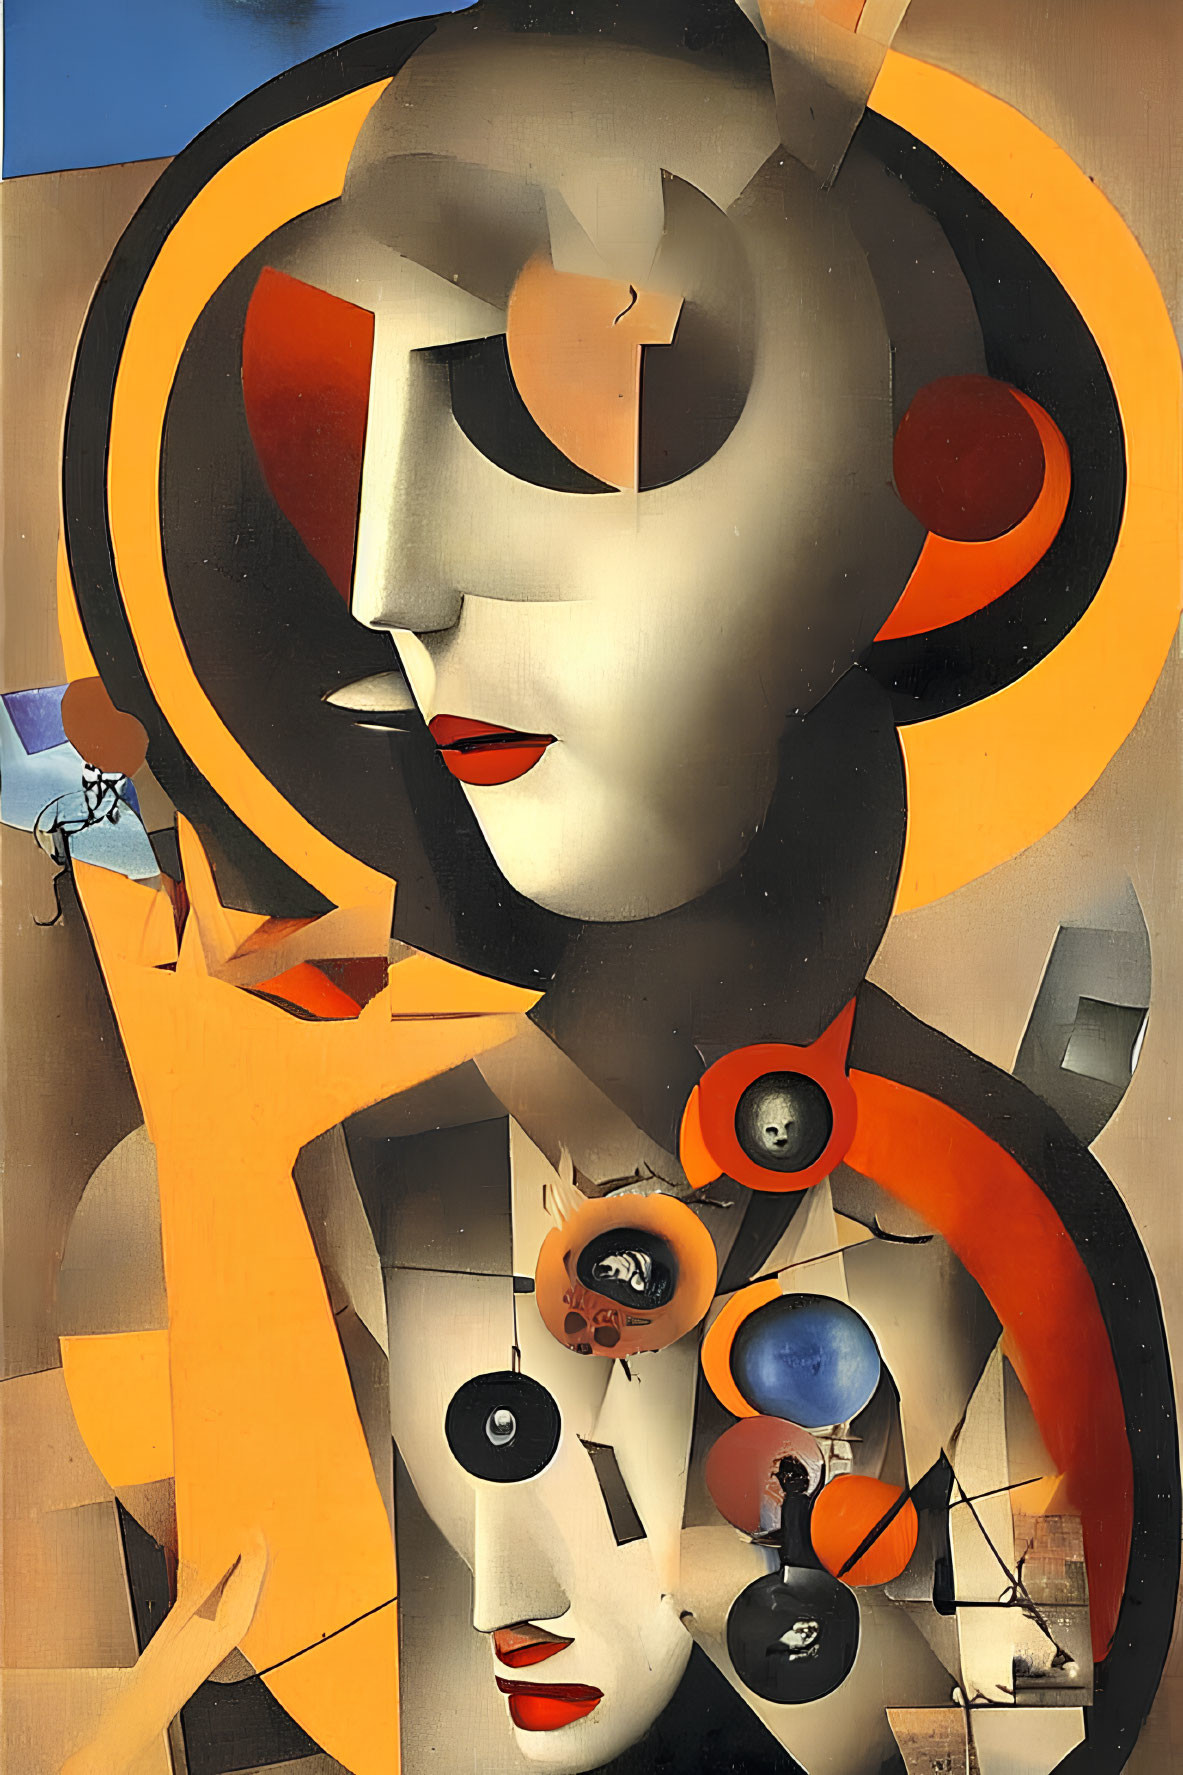 Abstract Female Figure in Surrealistic Painting with Geometric Shapes